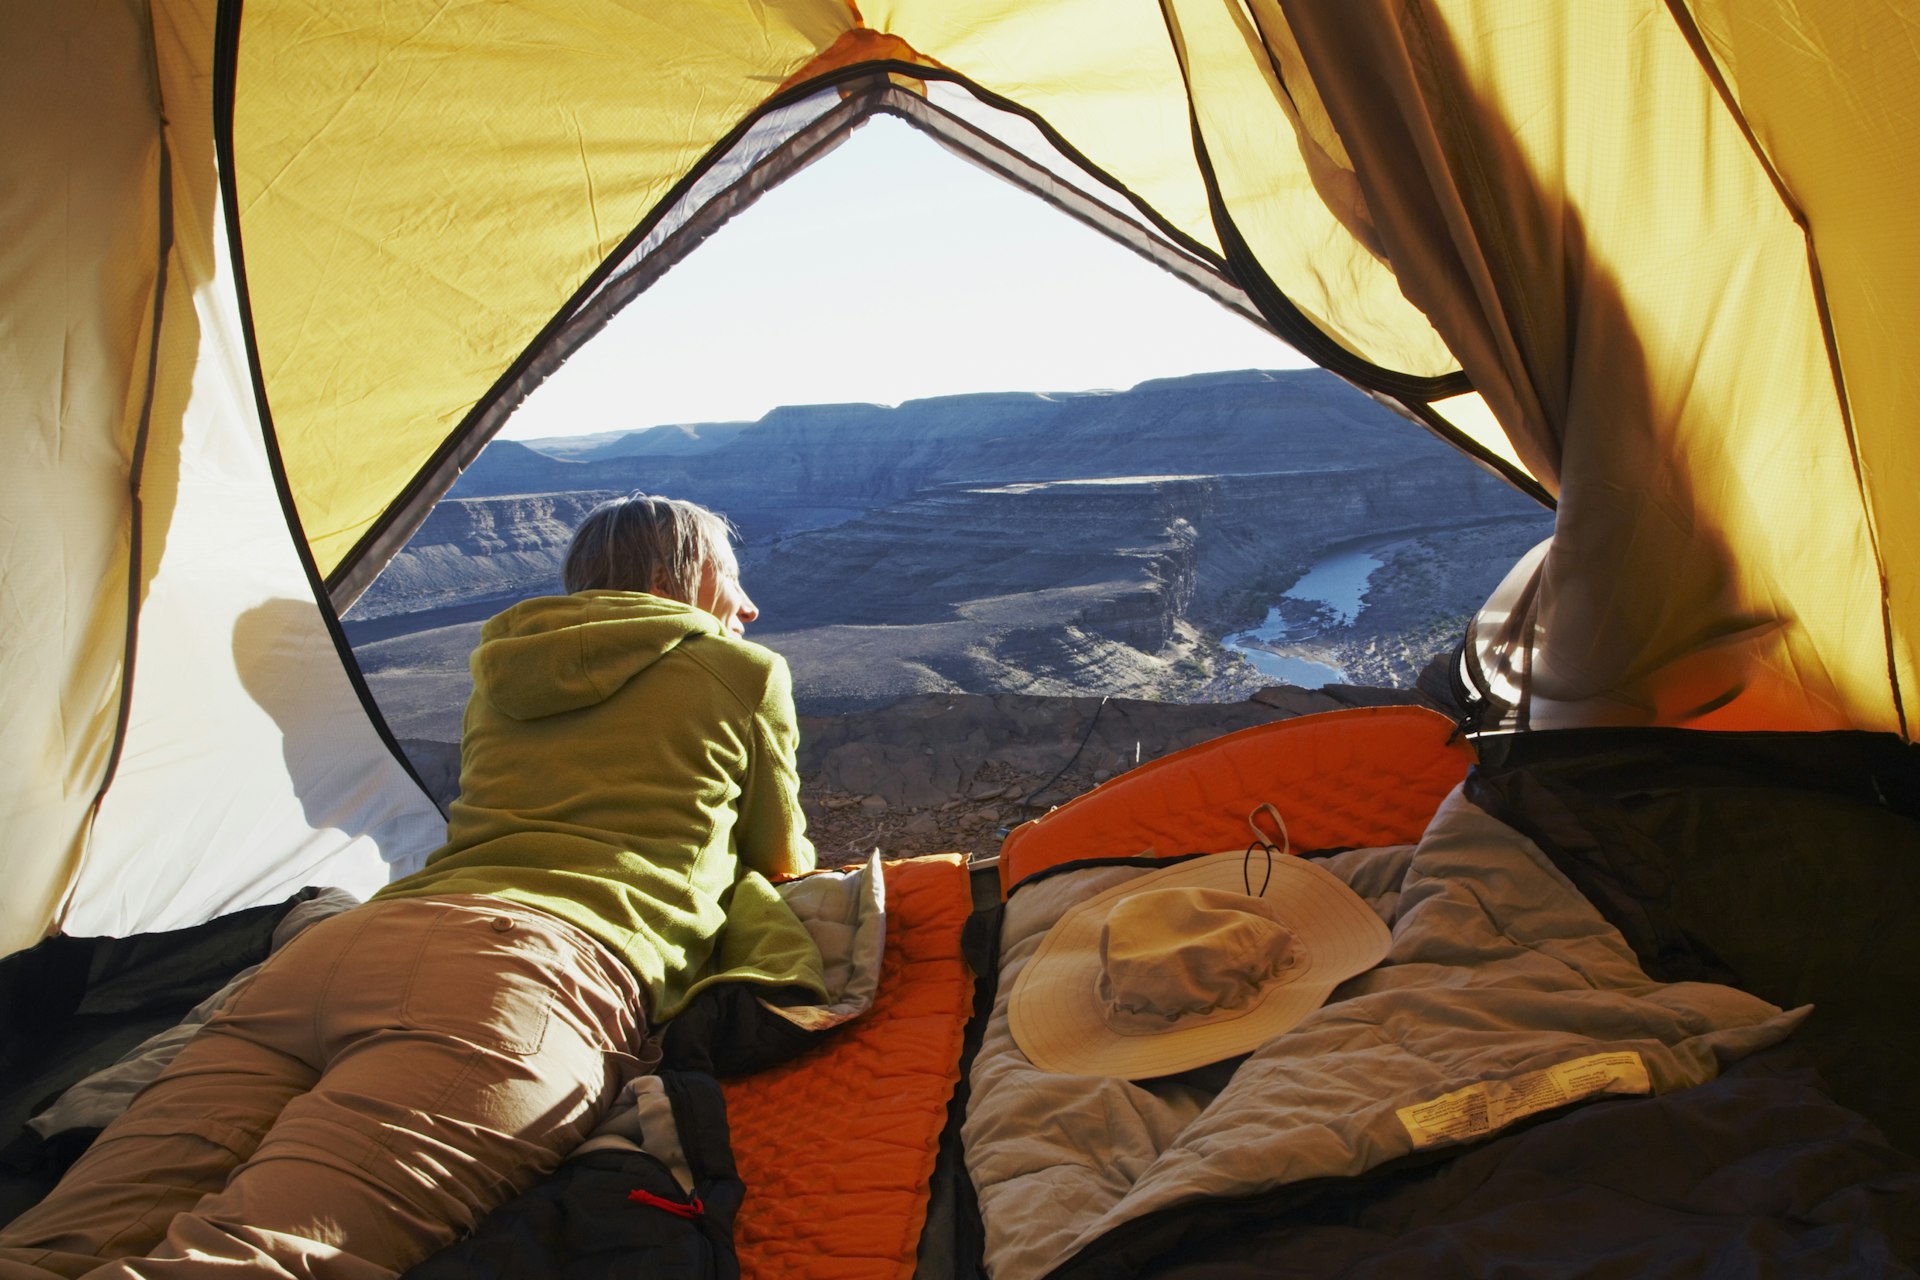 A woman lying in a tent, Horse Shoe Bend, Fish River Canyon, Namibia